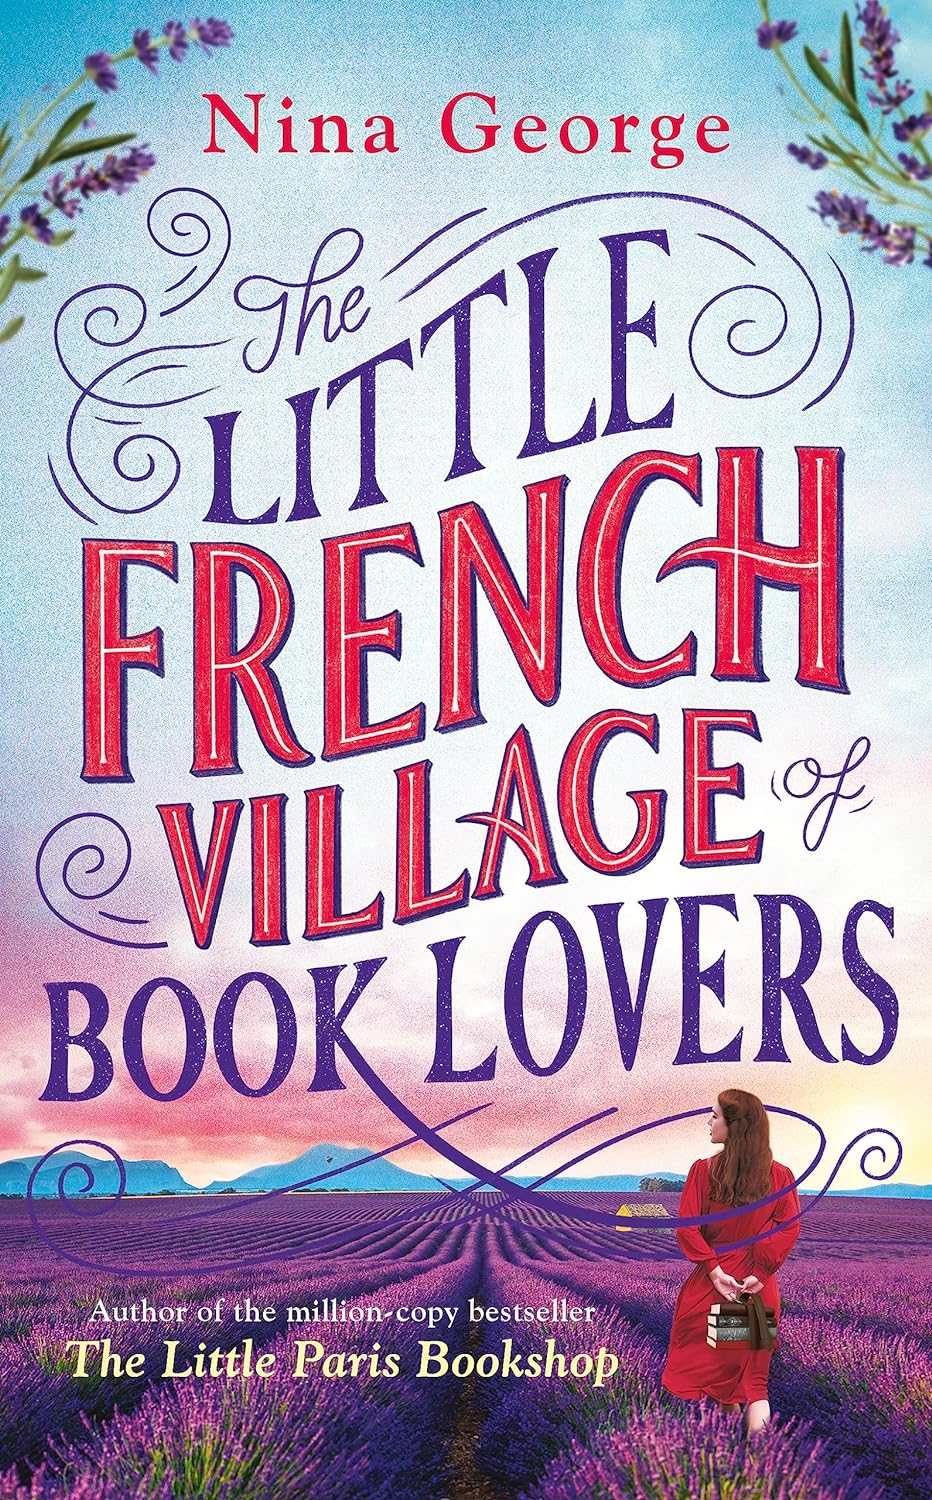 THE LITTLE FRENCH VILLAGE OF BOOK LOVERS